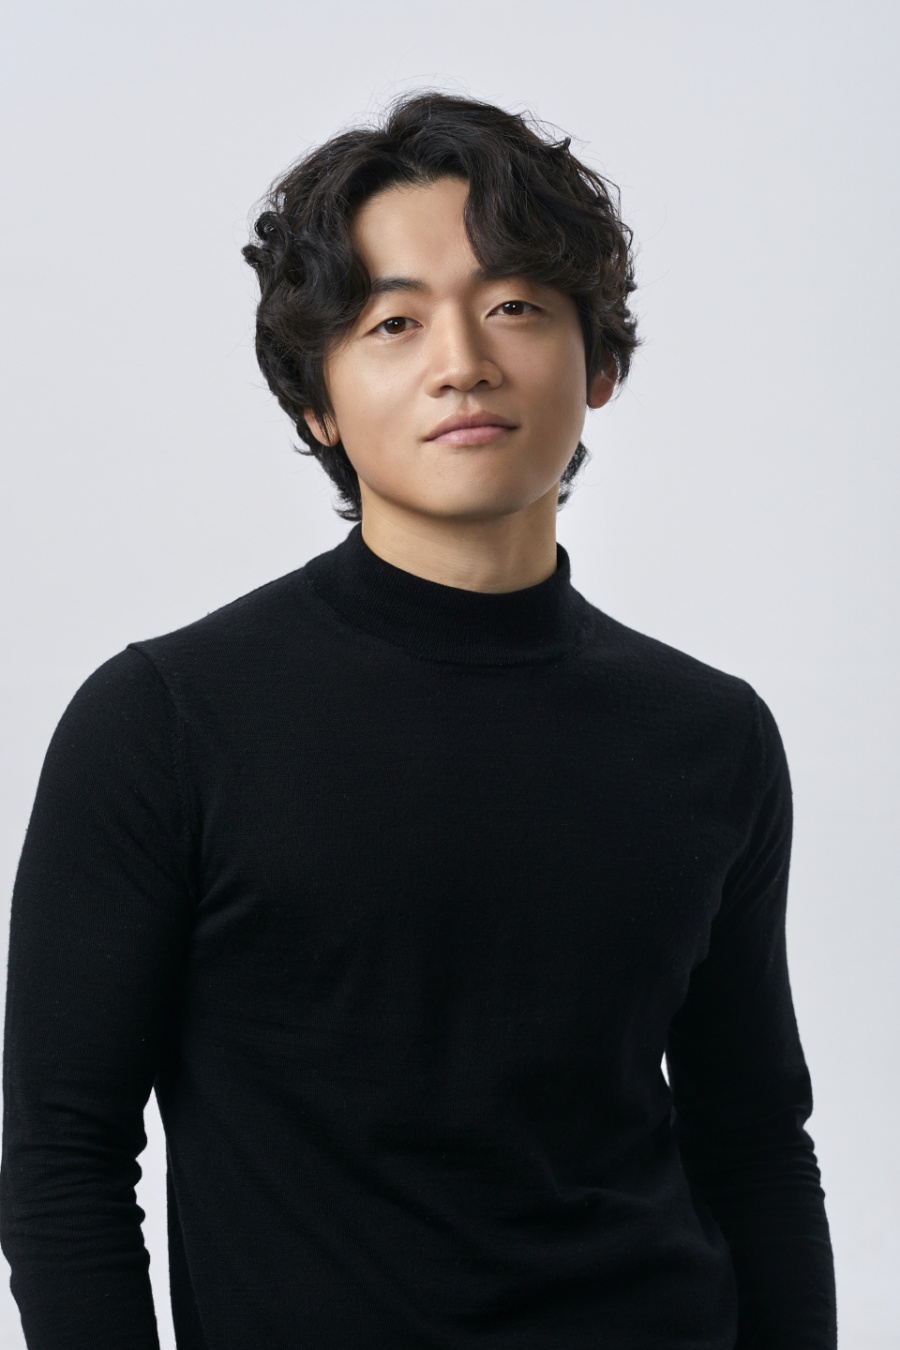 Actor zobok-rae has signed an exclusive contract with BH Entertainment.Zobok-rae, who has become a luxury Scene Stealer through the rich acting of crossing movies and dramas, has shown a big presence by playing a full-fledged role in Namok in MBC Imong which ended in July.He is expected to make another deep impression on the house theater as Yang Jong-yeol, a fourth-grade aide to Jang Tae-joon (Lee Jung-jae), who is about to be the first broadcast of JTBCs new monthly drama Aide: People Moving the World Season 2.BH Entertainment, which signed an exclusive contract with zobok-rae, was Coriander, Gong Seung-yeon, Kim Go-eun, Kim Yong-ji, Park Sung-hoon, Park Jung-woo, Park Ji-hoo, Park Hae-soo, He is an actor management company belonging to Hee Jun, Jung Woo, Jingu, Chu Ja Hyun, Karata Erica, Han Gain, Han Ji-min and Han Hyo-joo.BH Entertainment said, I am delighted to be with a zobok-rae actor with unlimited possibilities.I will continue to provide full support to communicate with the public through a number of works. He promised faith and support for zobok-rae.Advisor 2, starring zobok-rae, will be broadcast on JTBC at 9:30 pm on Monday, November 11th, following the Chosun Hall of the Works of the Choson Hall.=